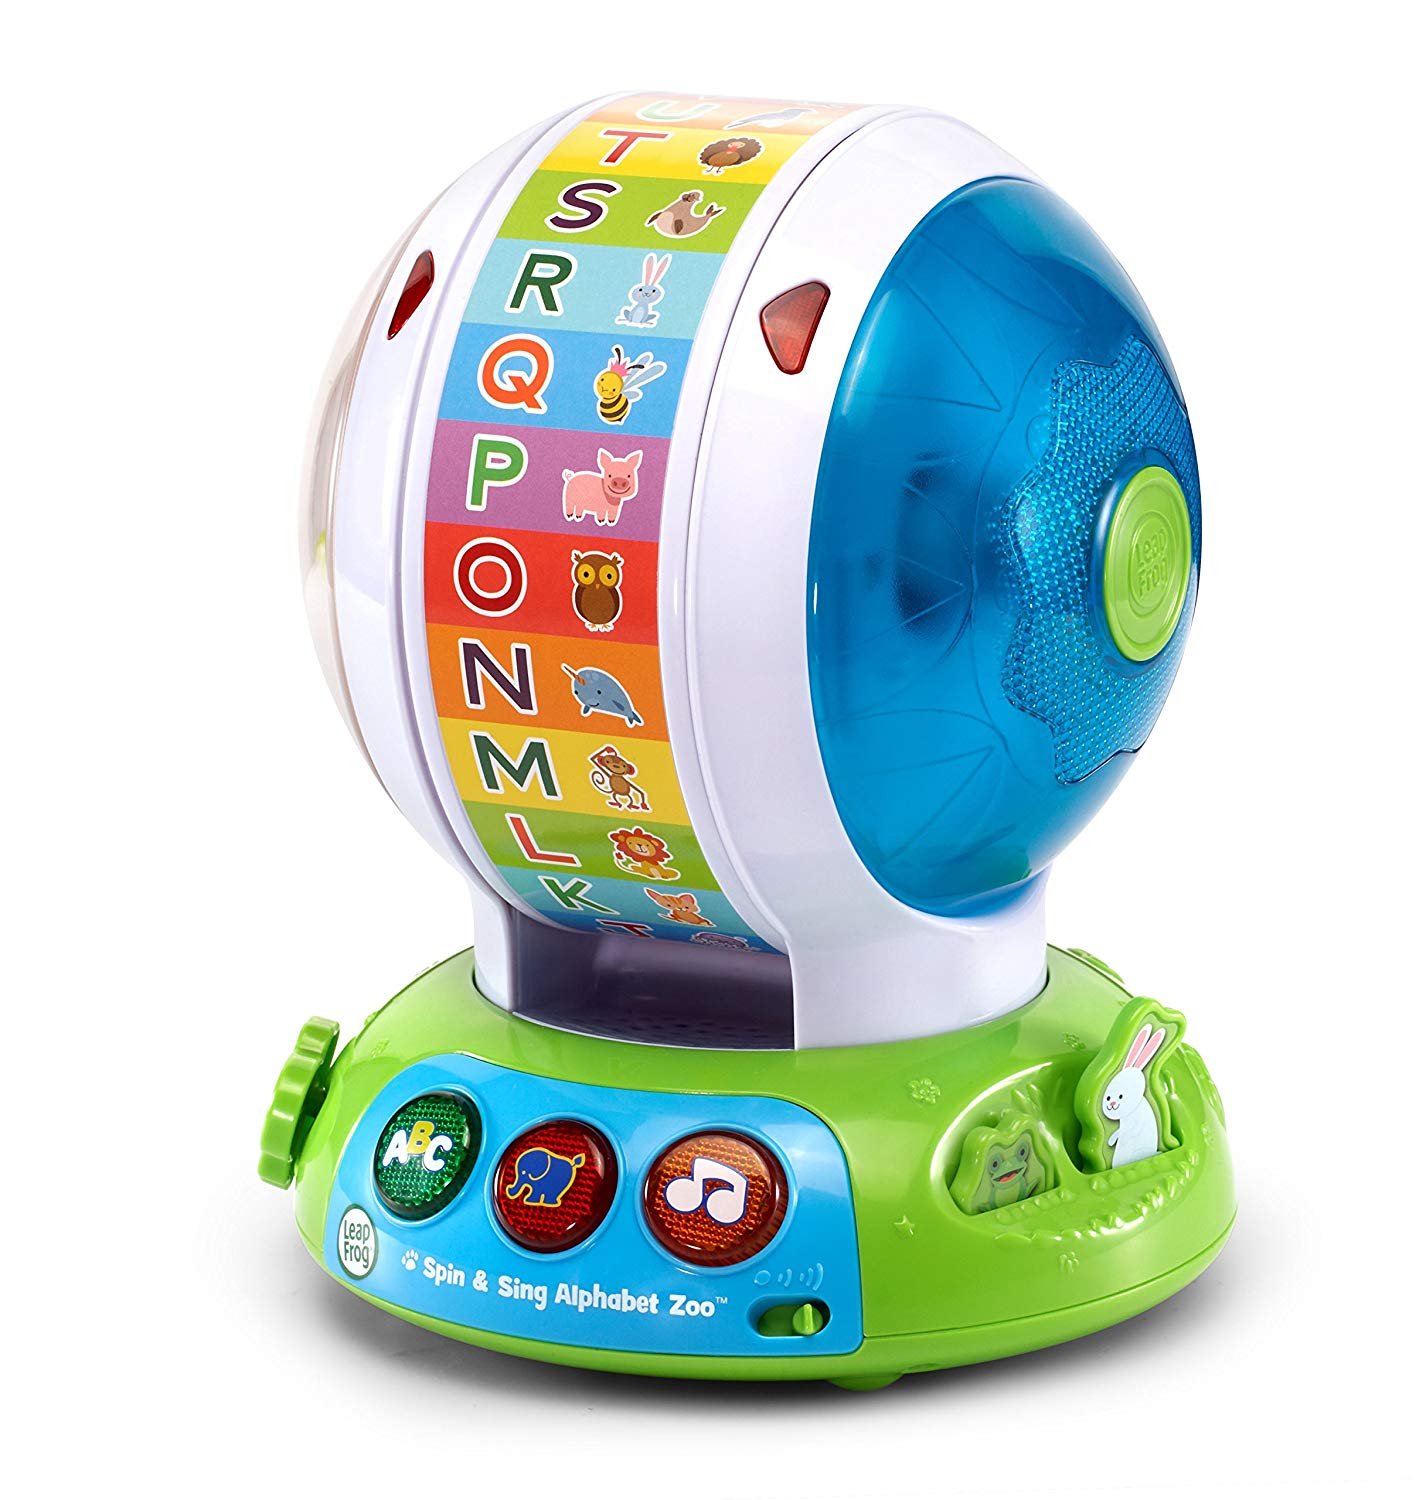 LeapFrog Spin and Sing Alphabet Zoo review